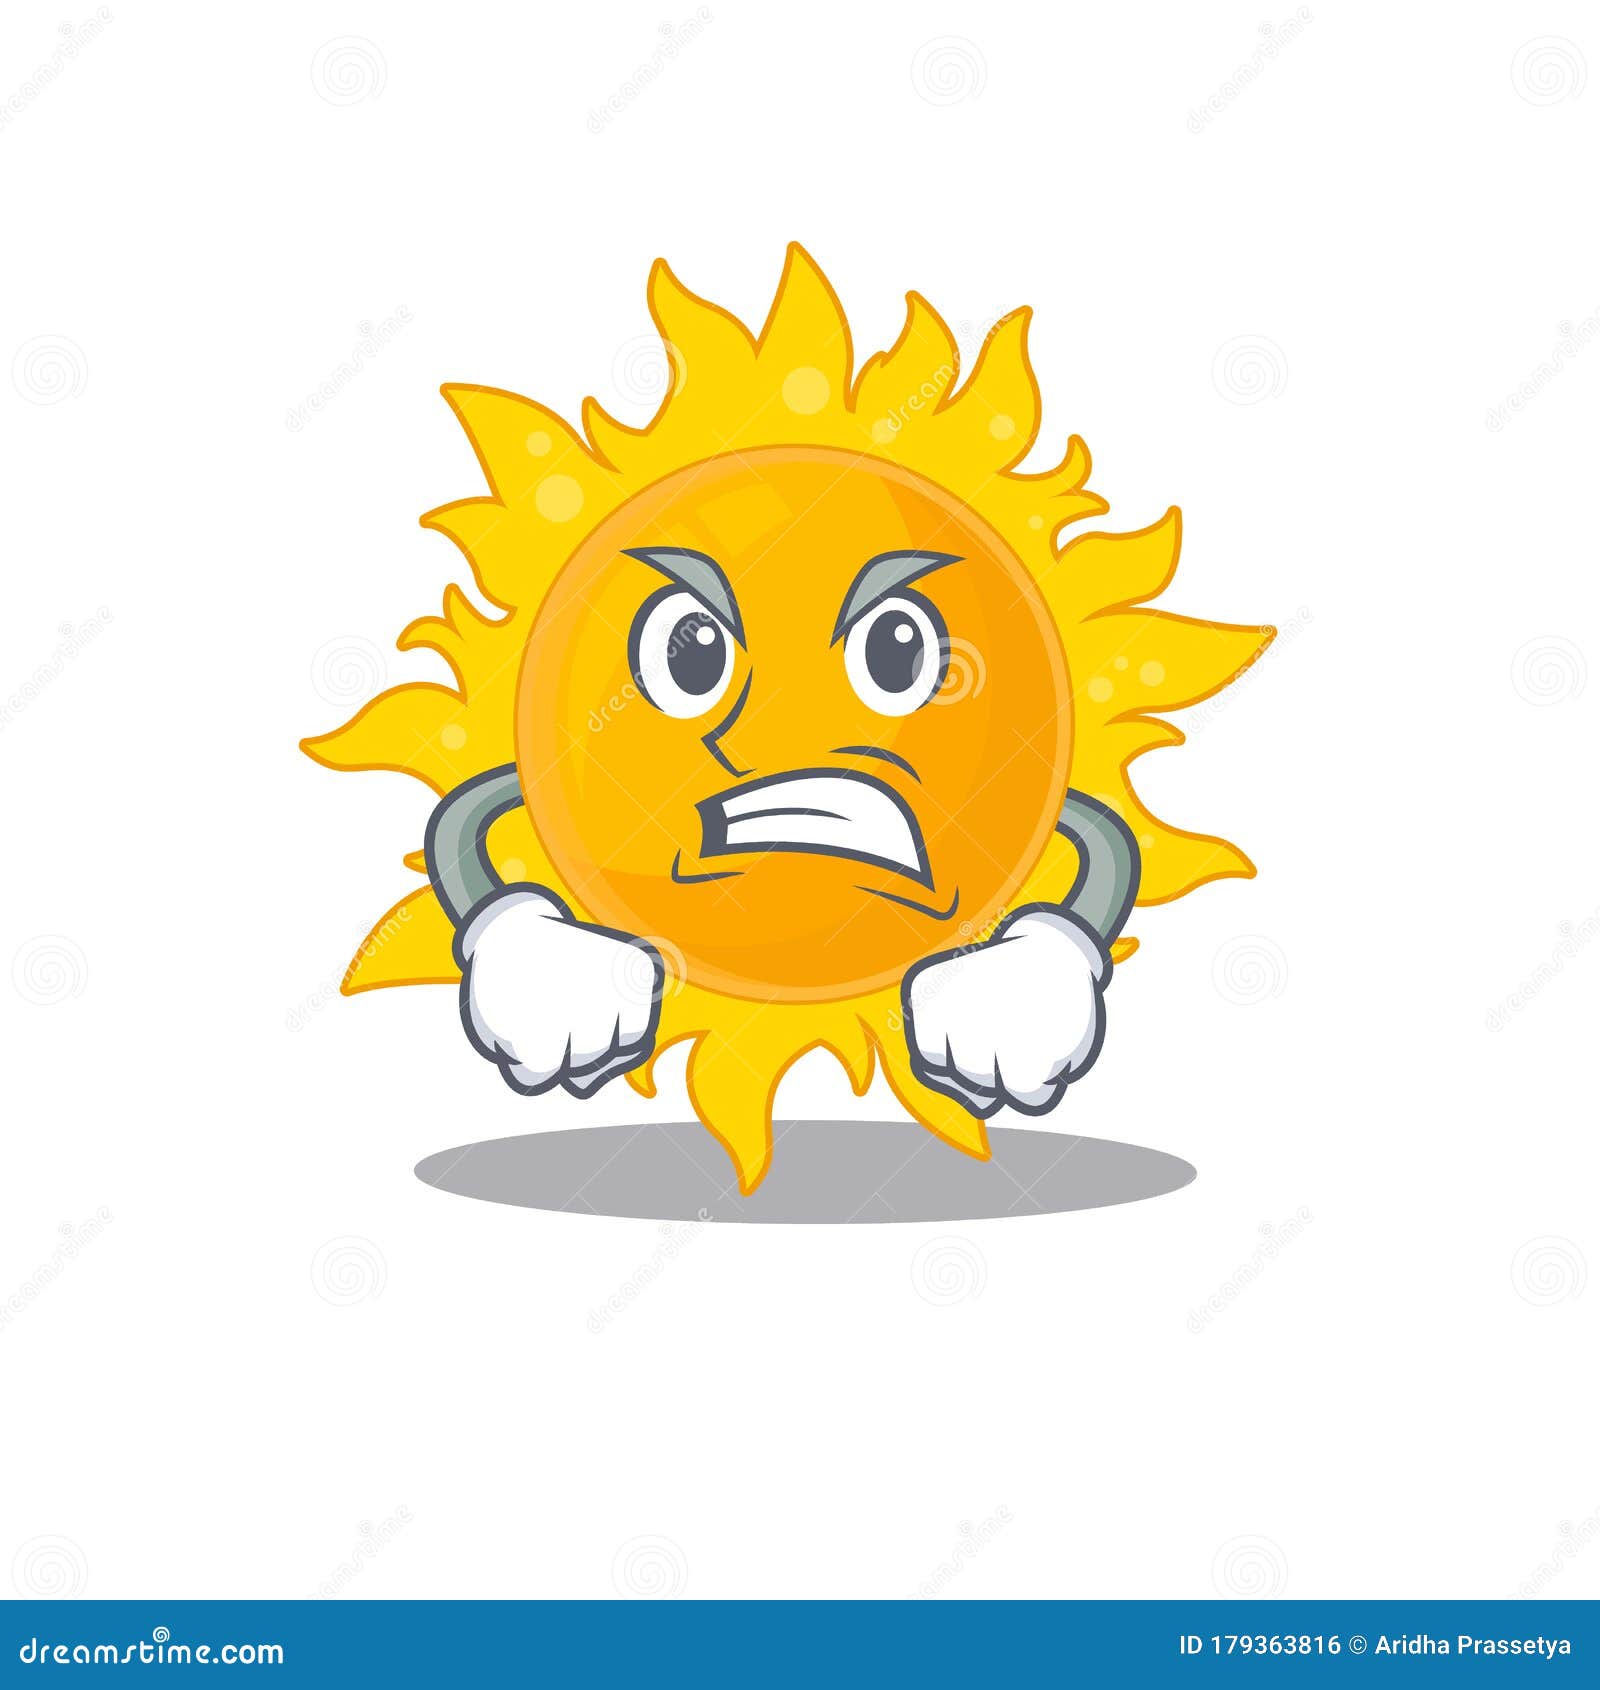 Mascot Design Concept Of Summer Sun With Angry Face Stock Vector